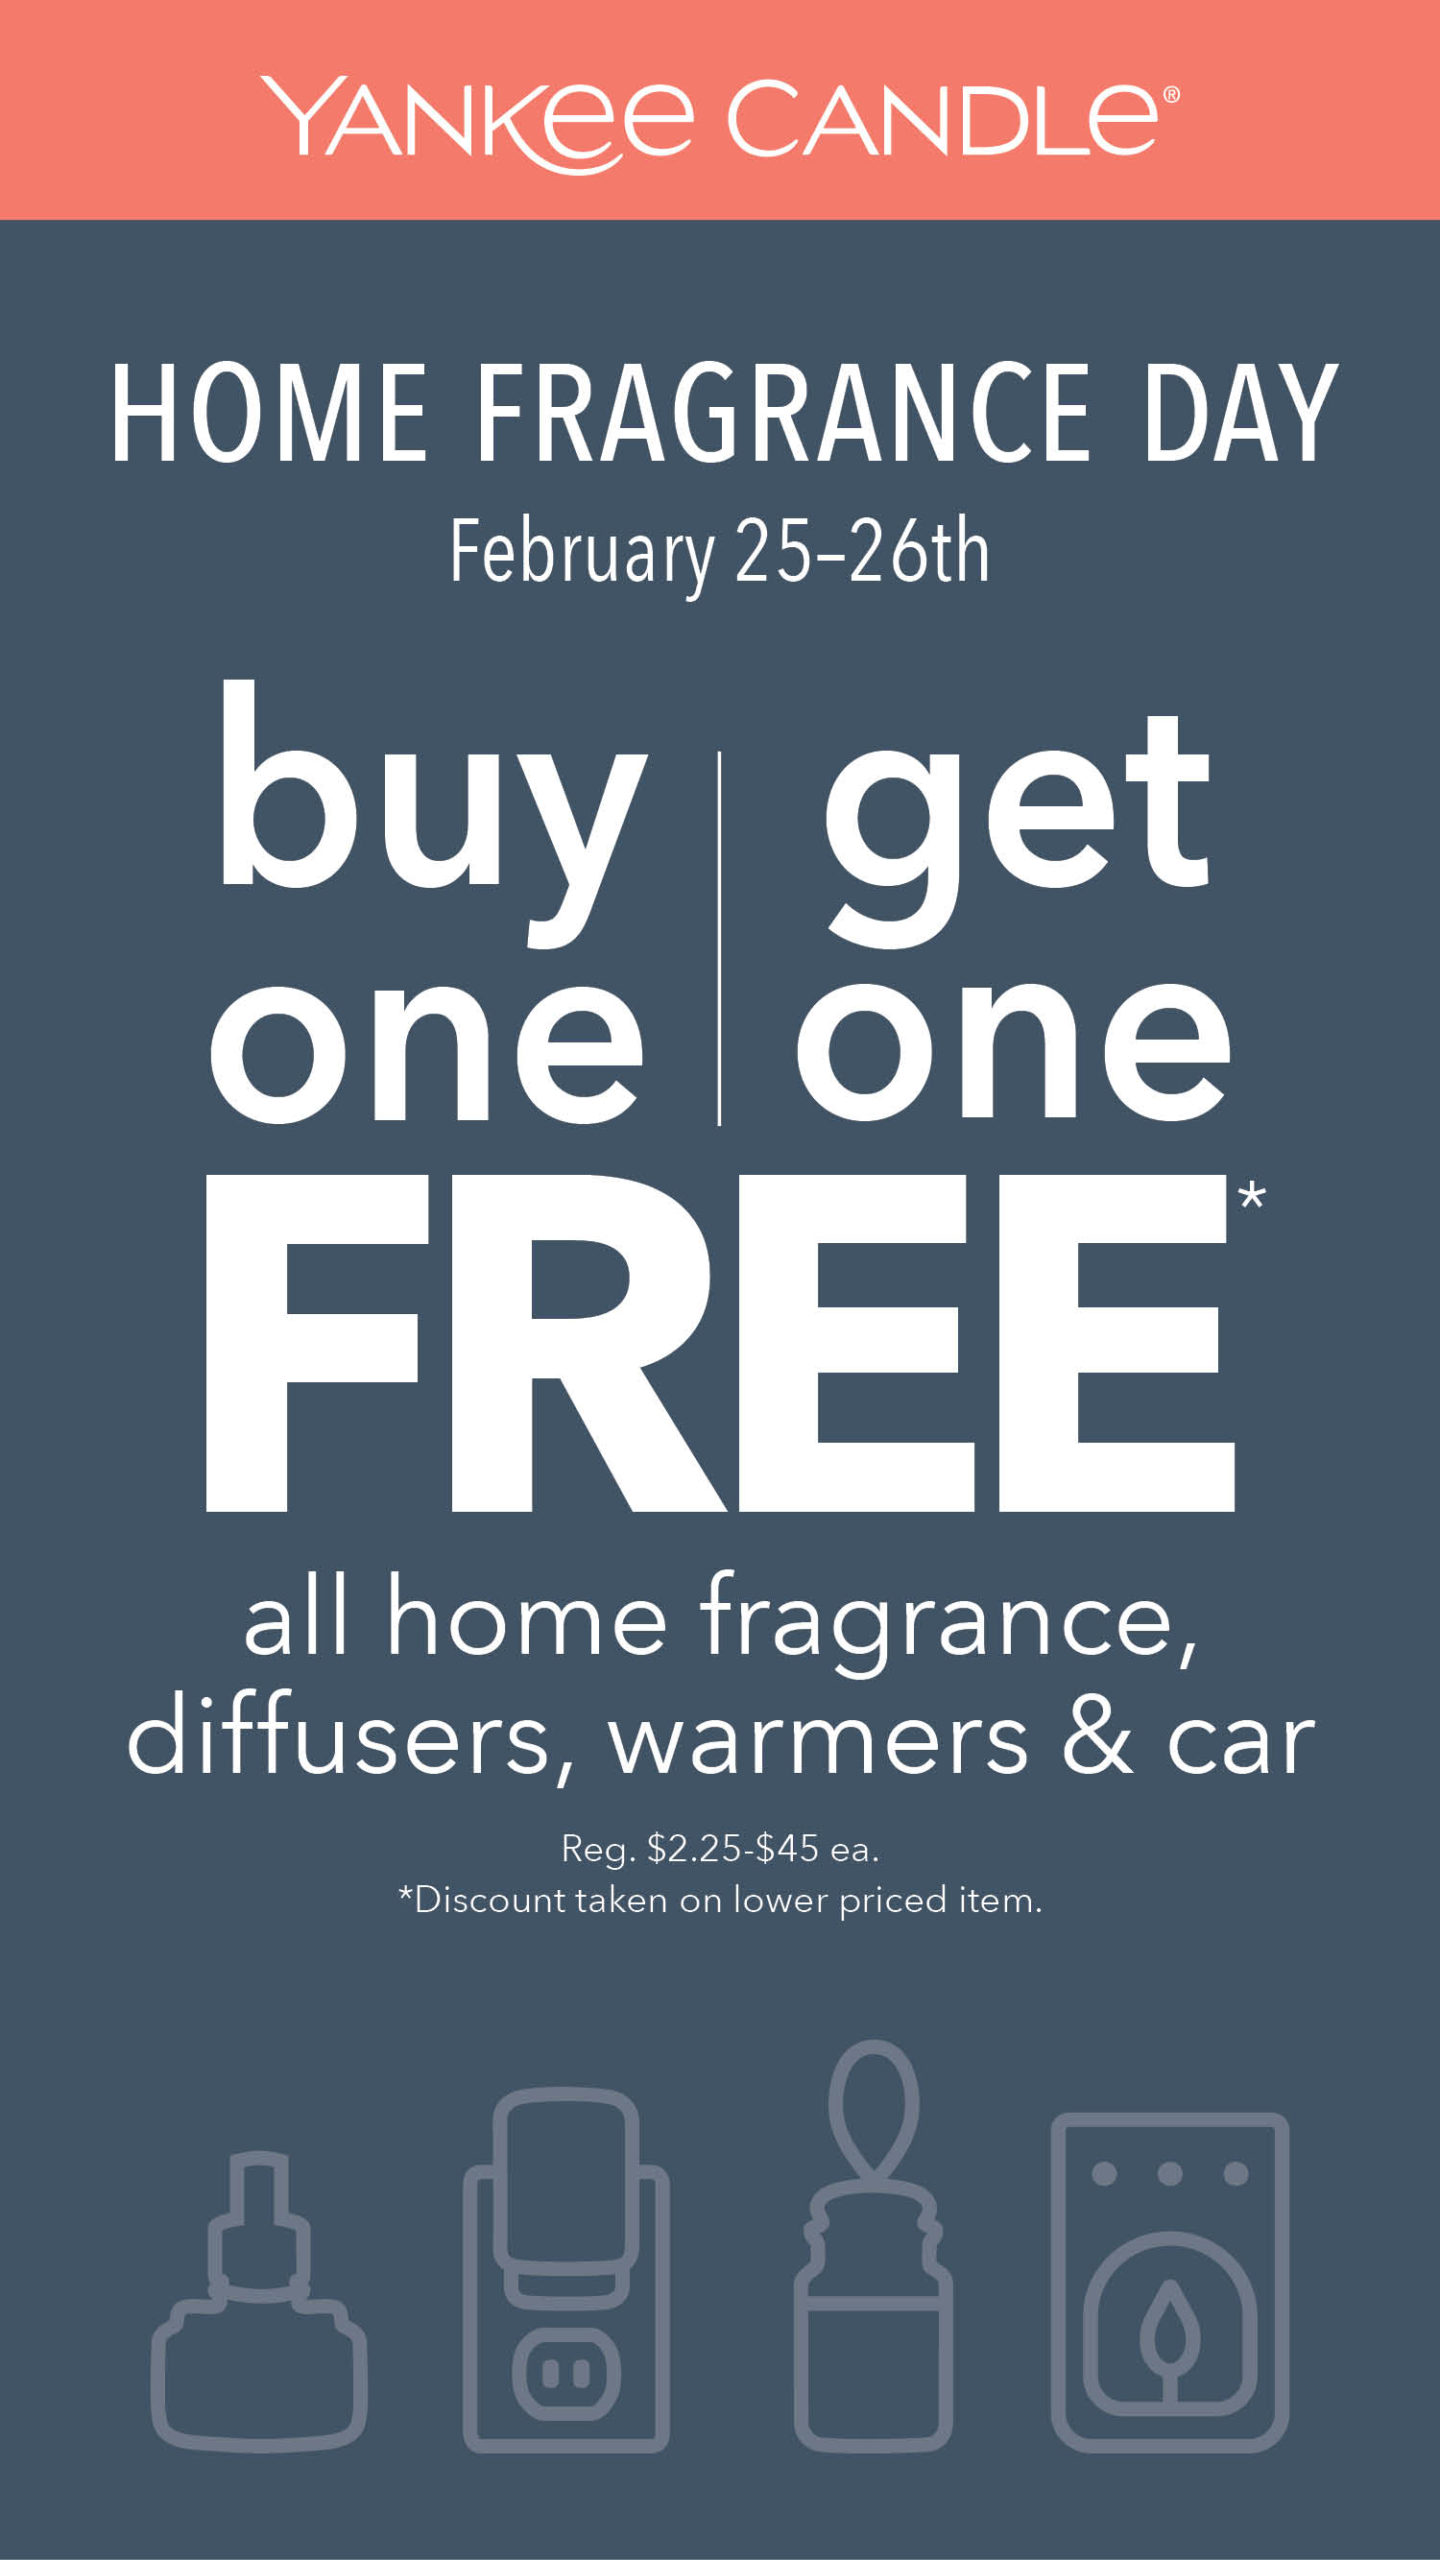 Home Fragrance Day Weekend is BACK